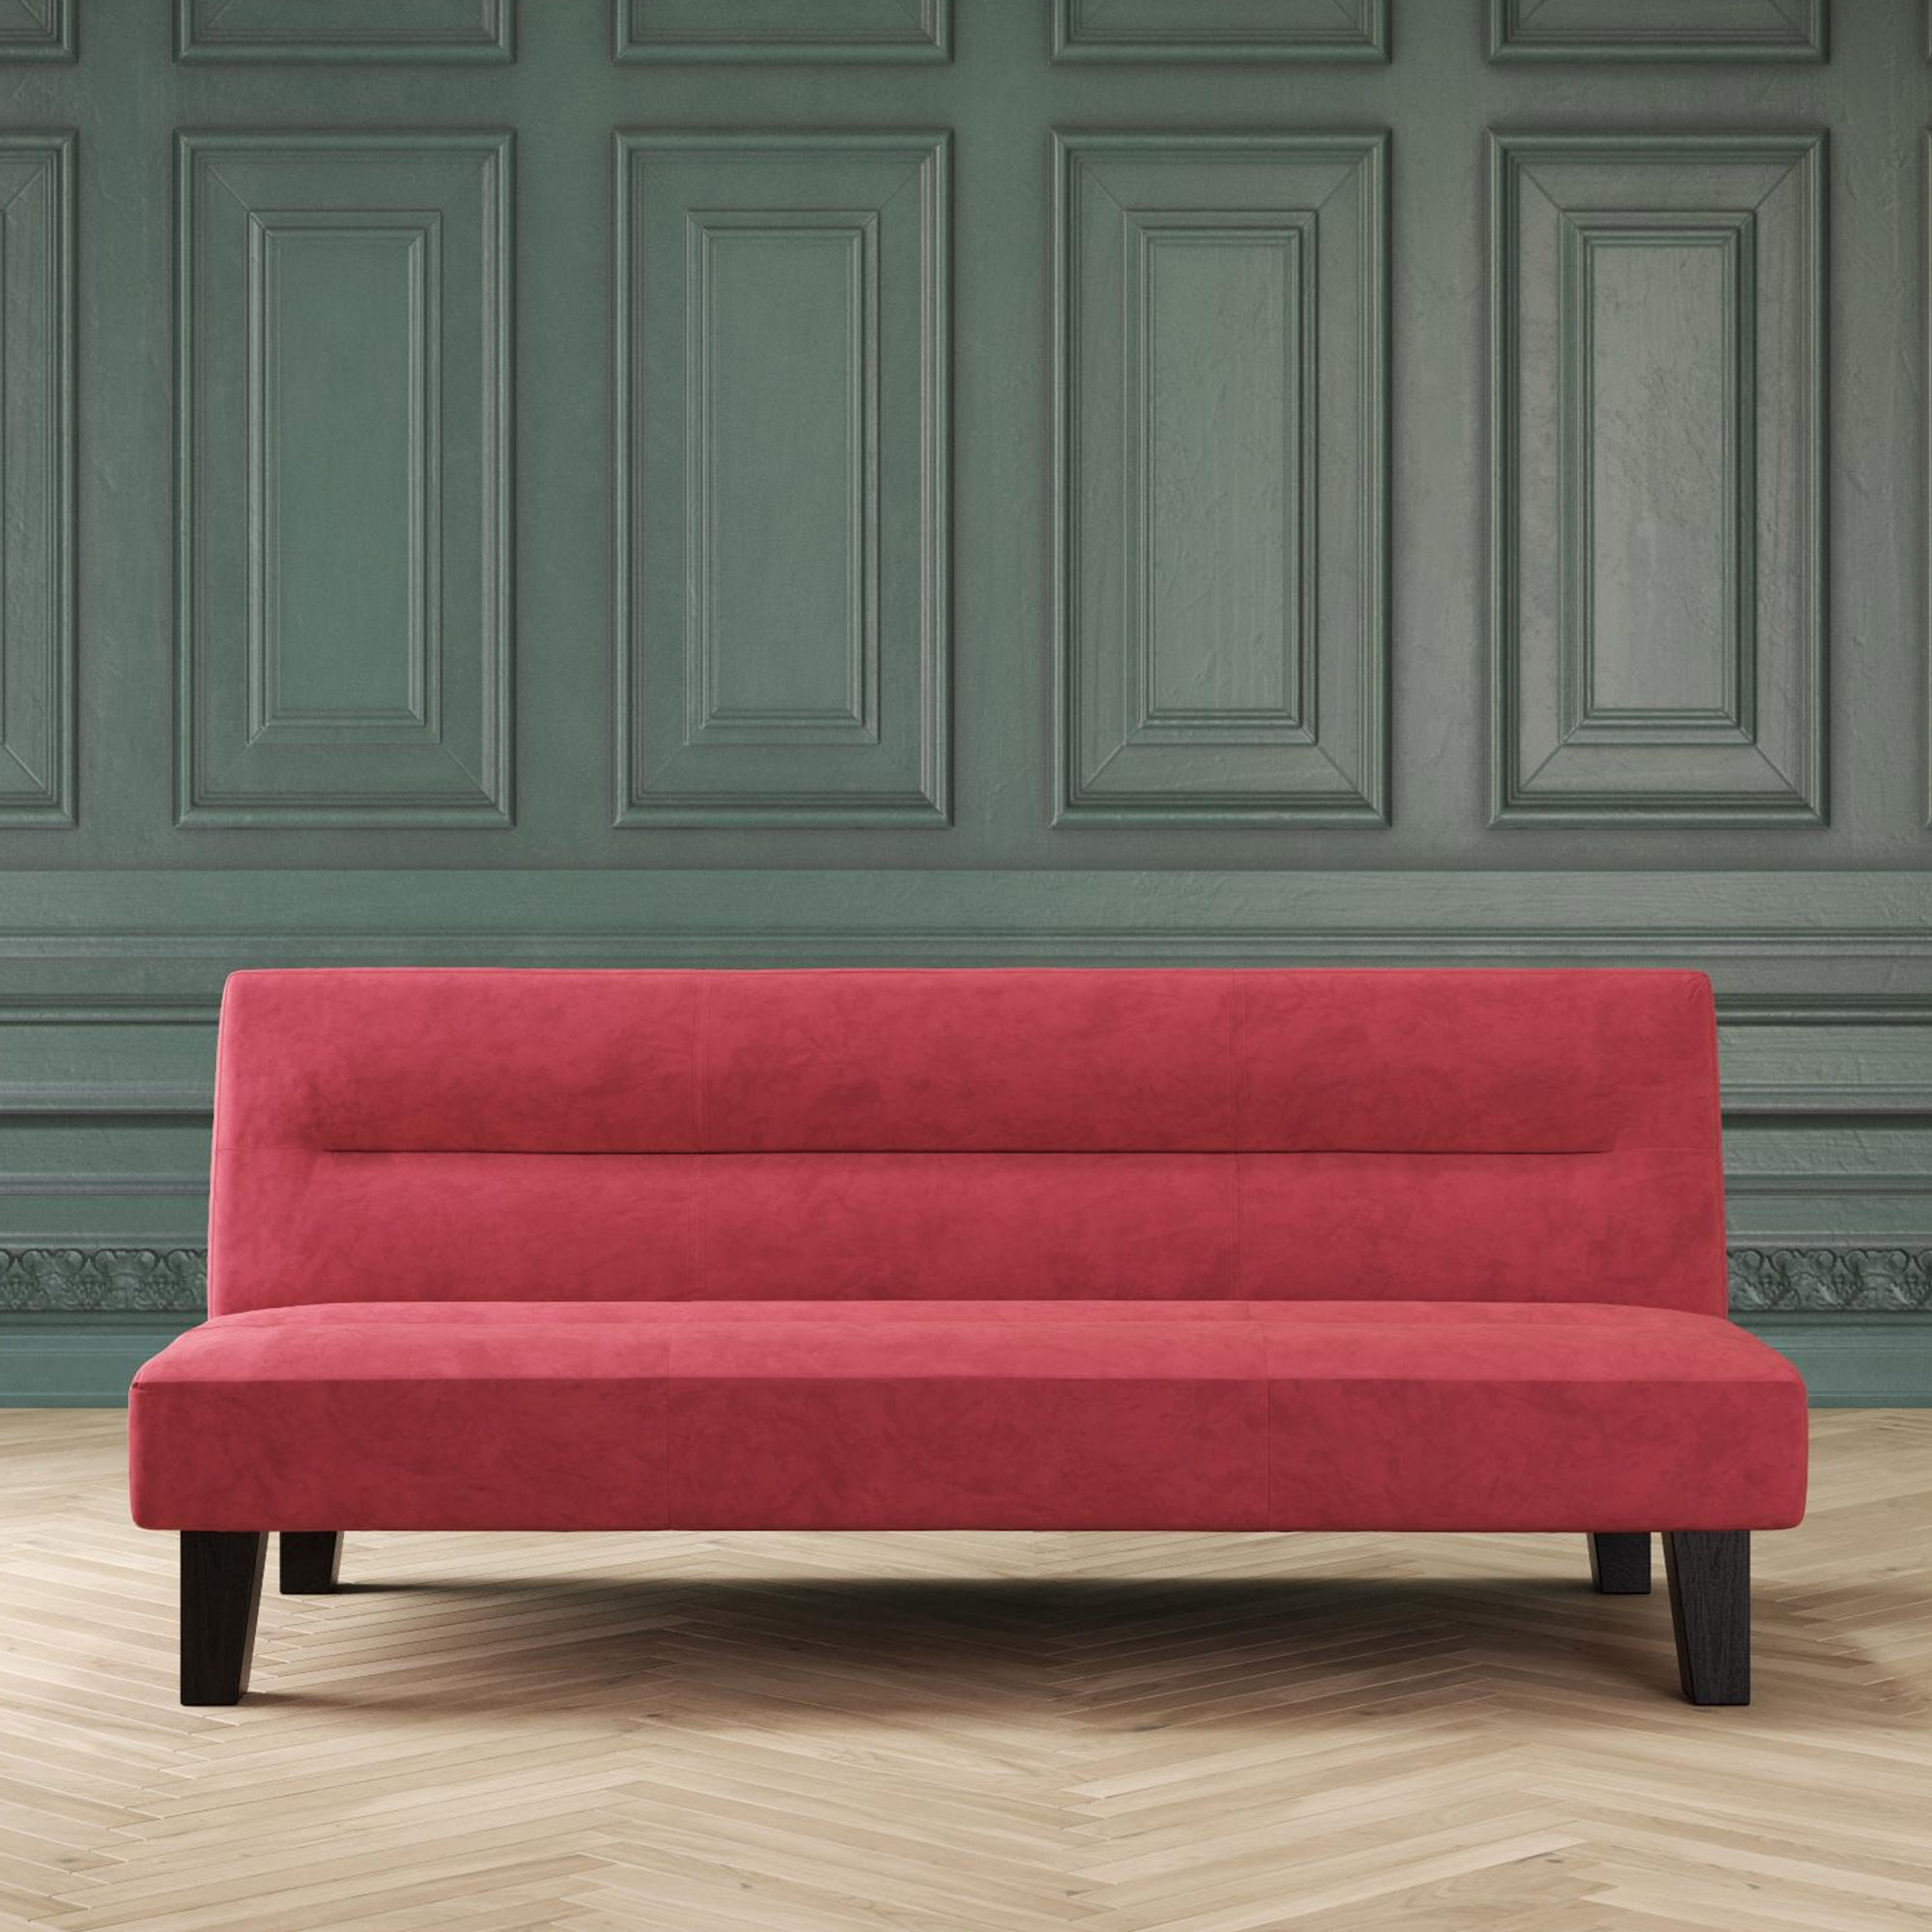 Red futon that becomes a sleeper